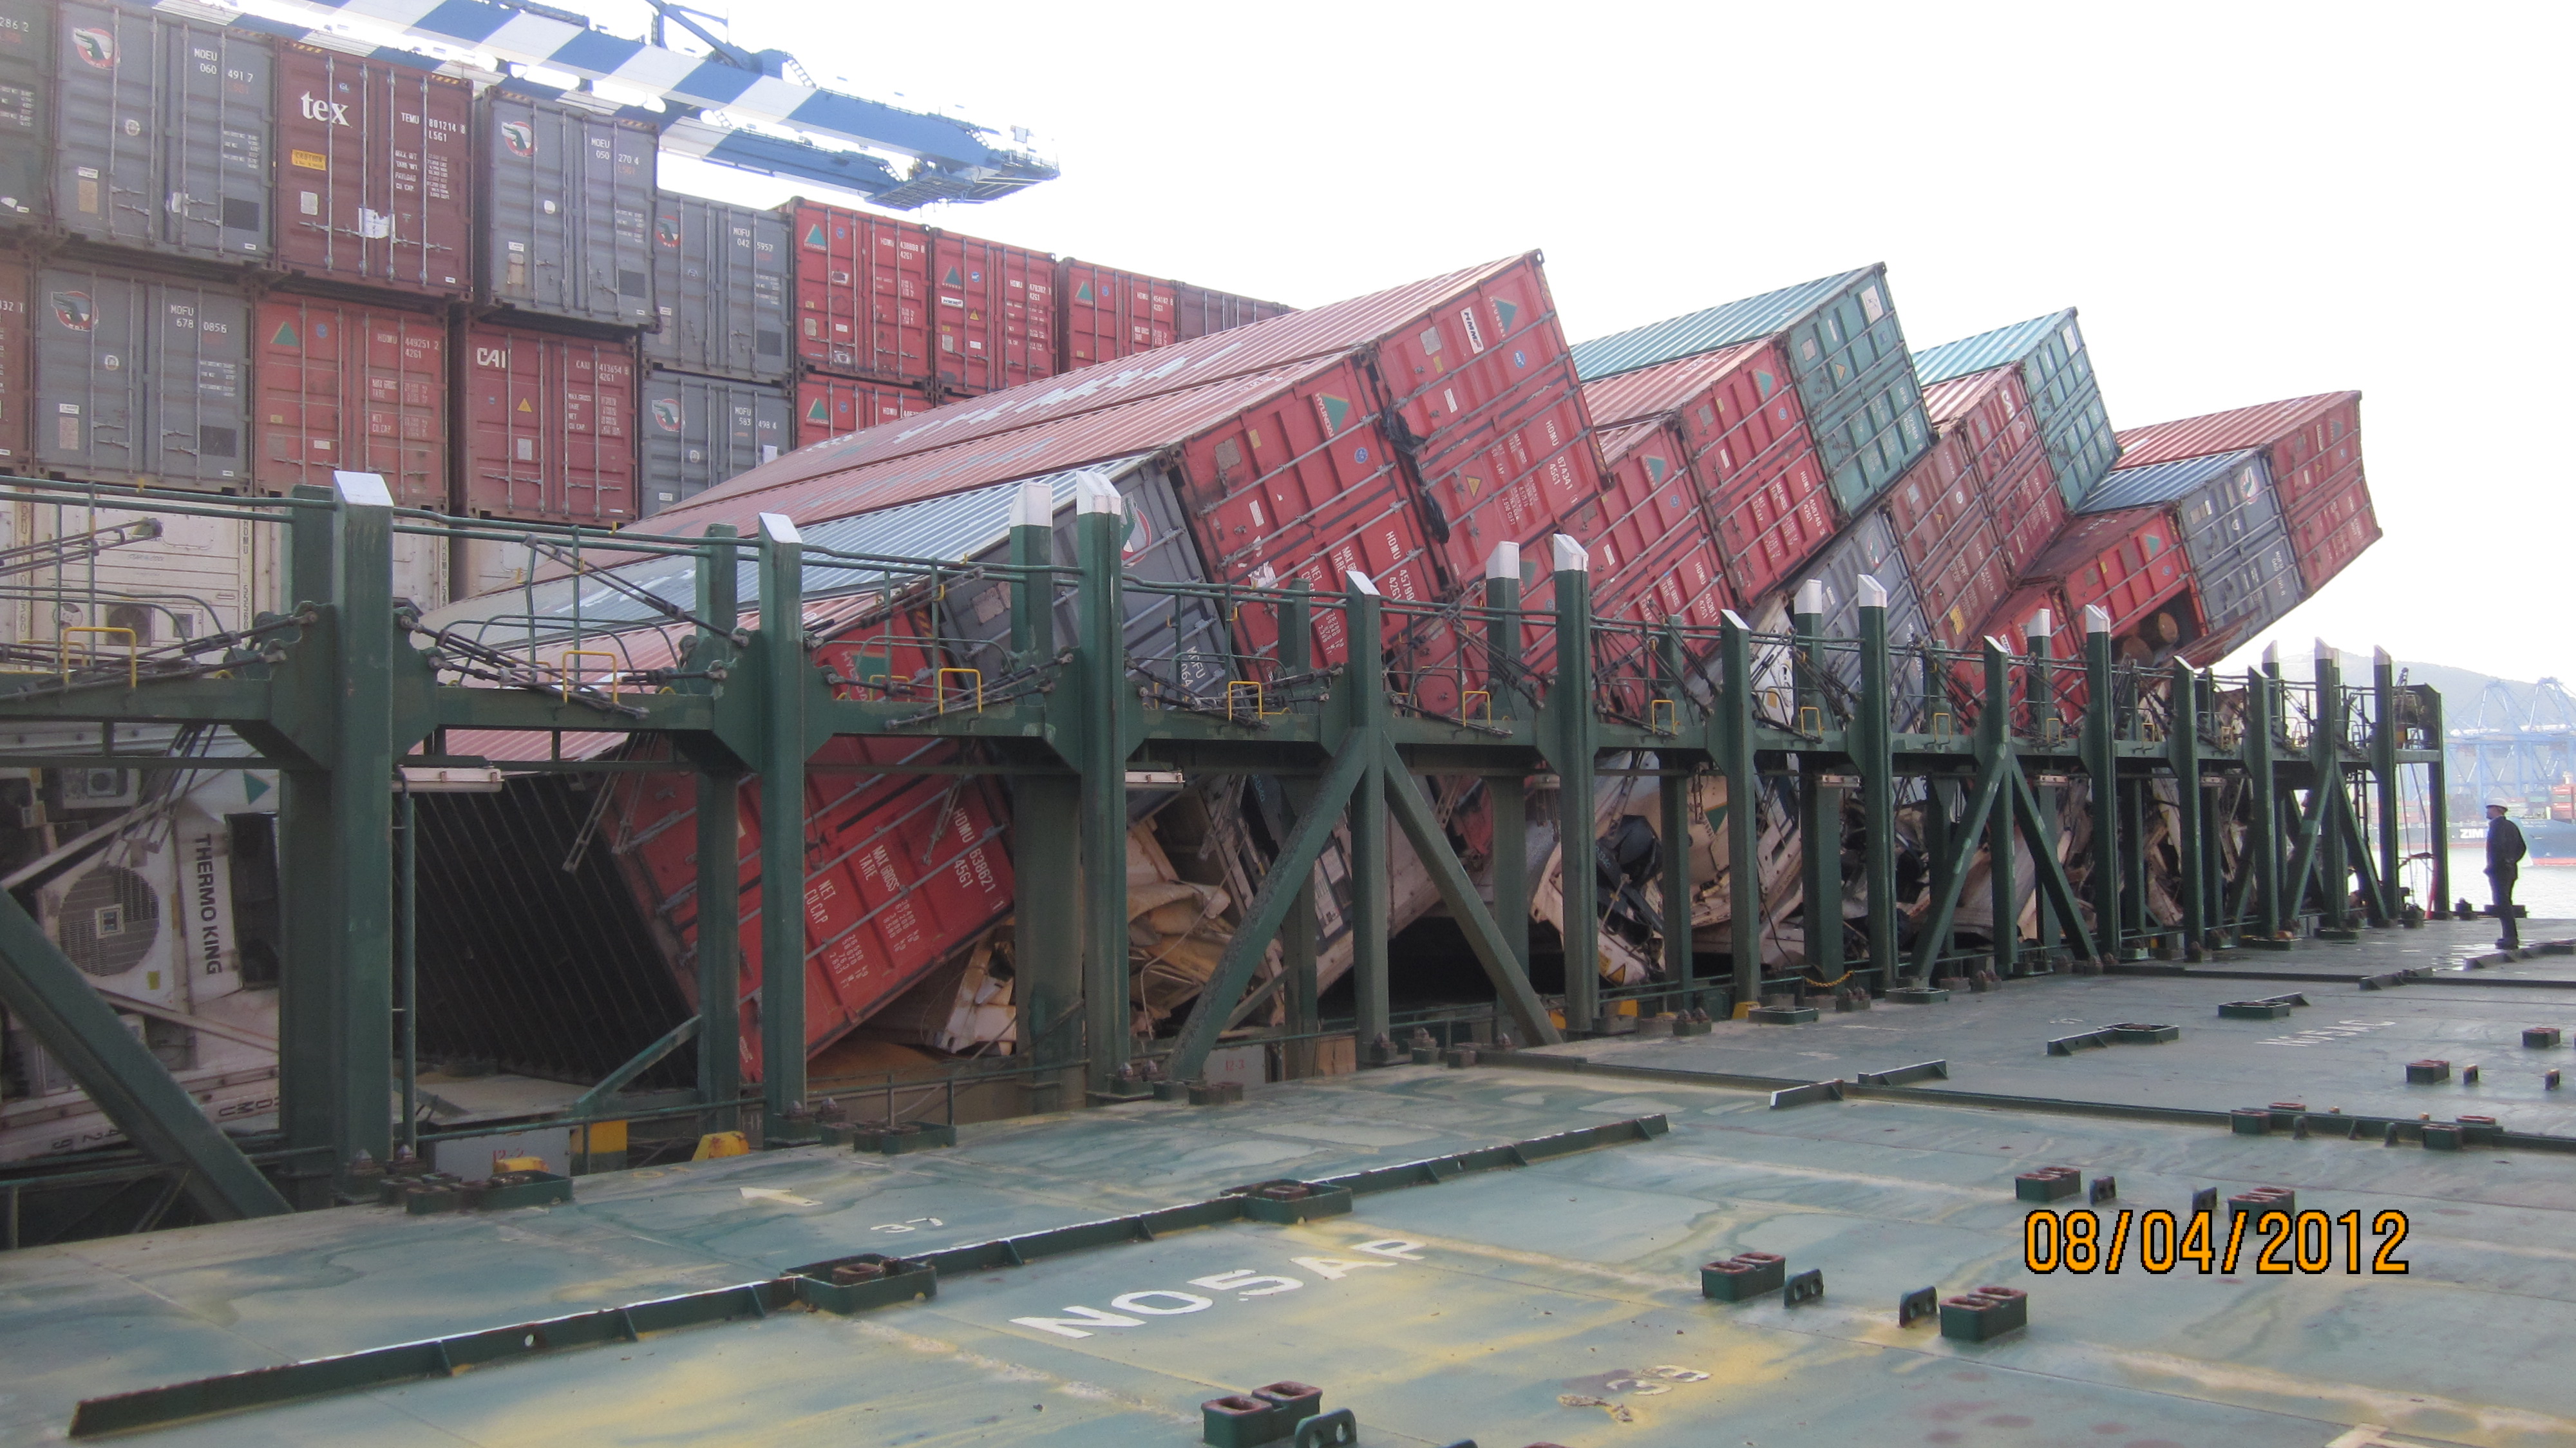 Image of containers that have collapsed on a ship